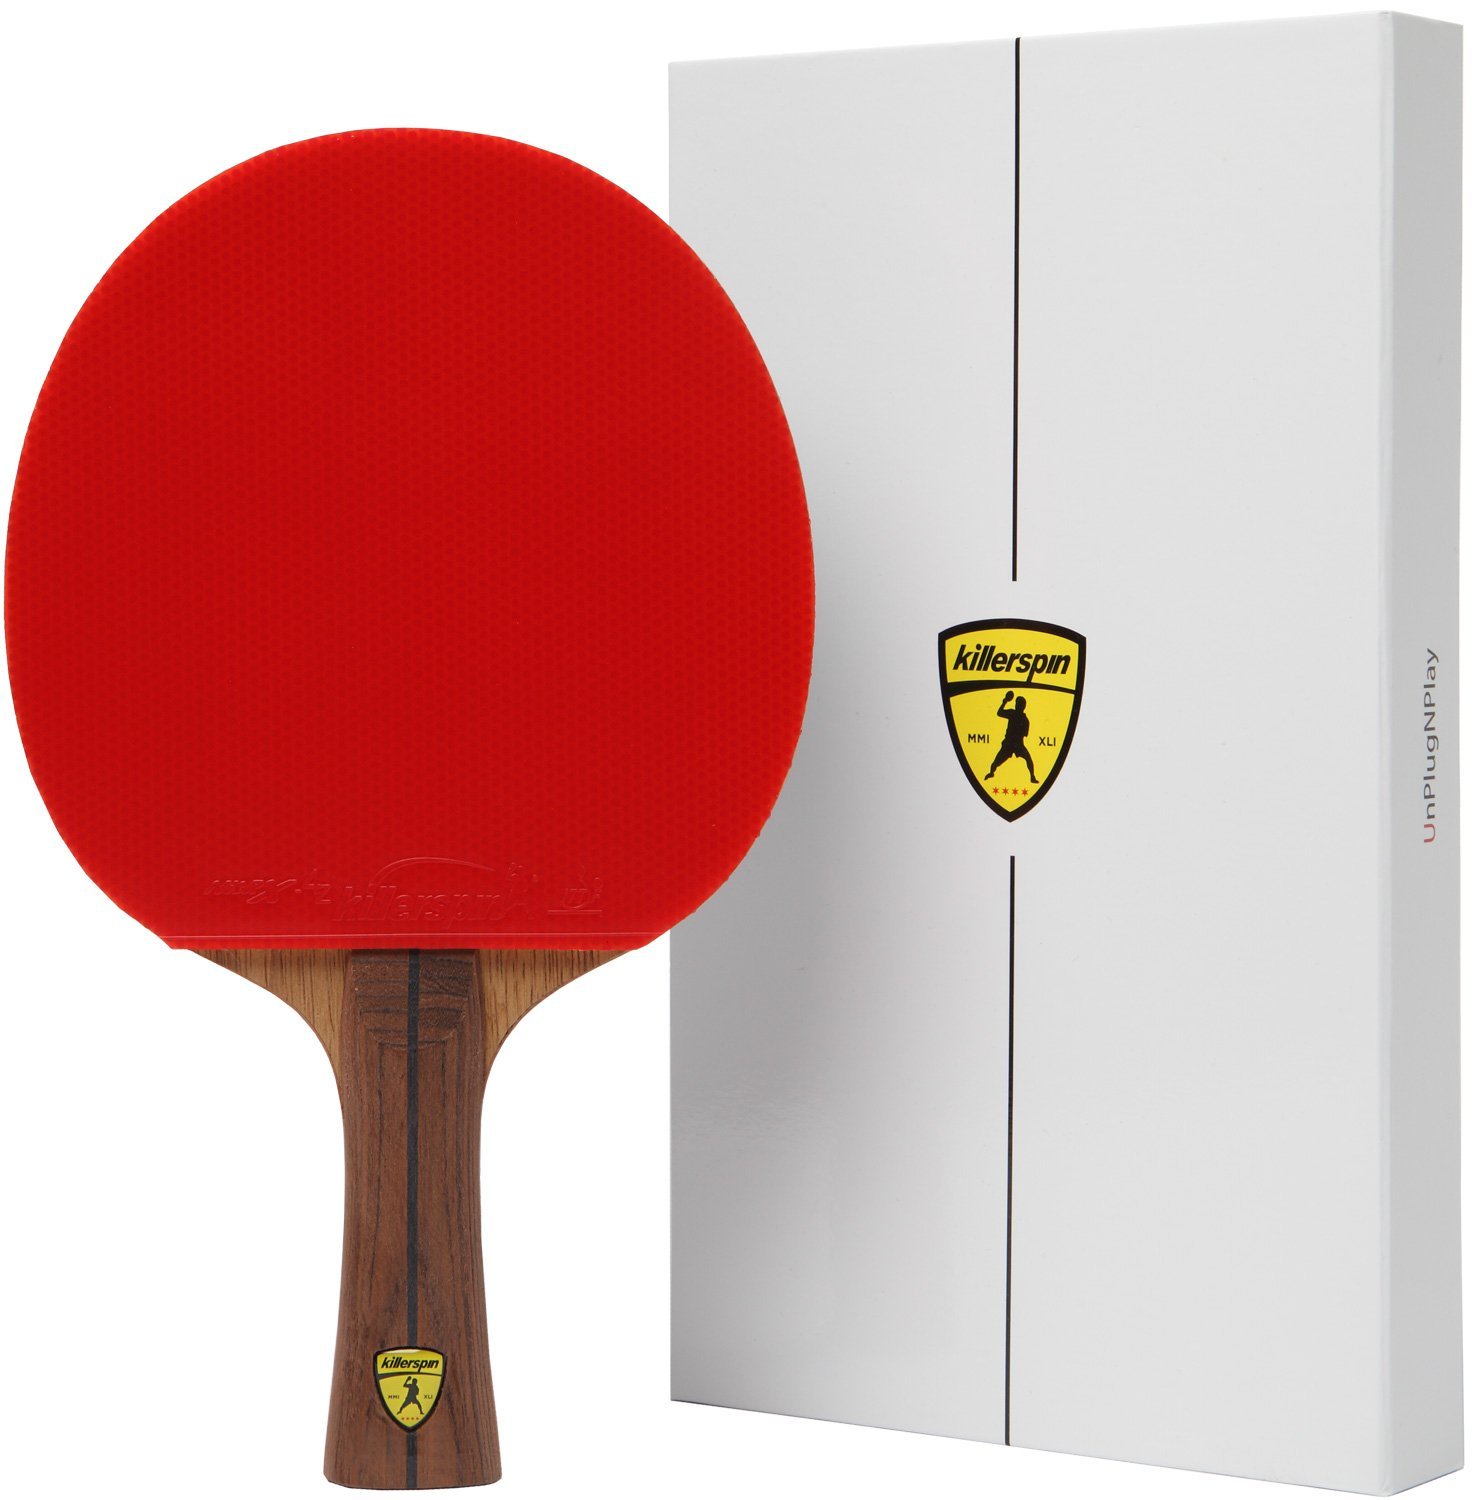 Killerspin JET800 SPEED N1 Advanced Level Table Tennis Paddle, Red - image 1 of 9